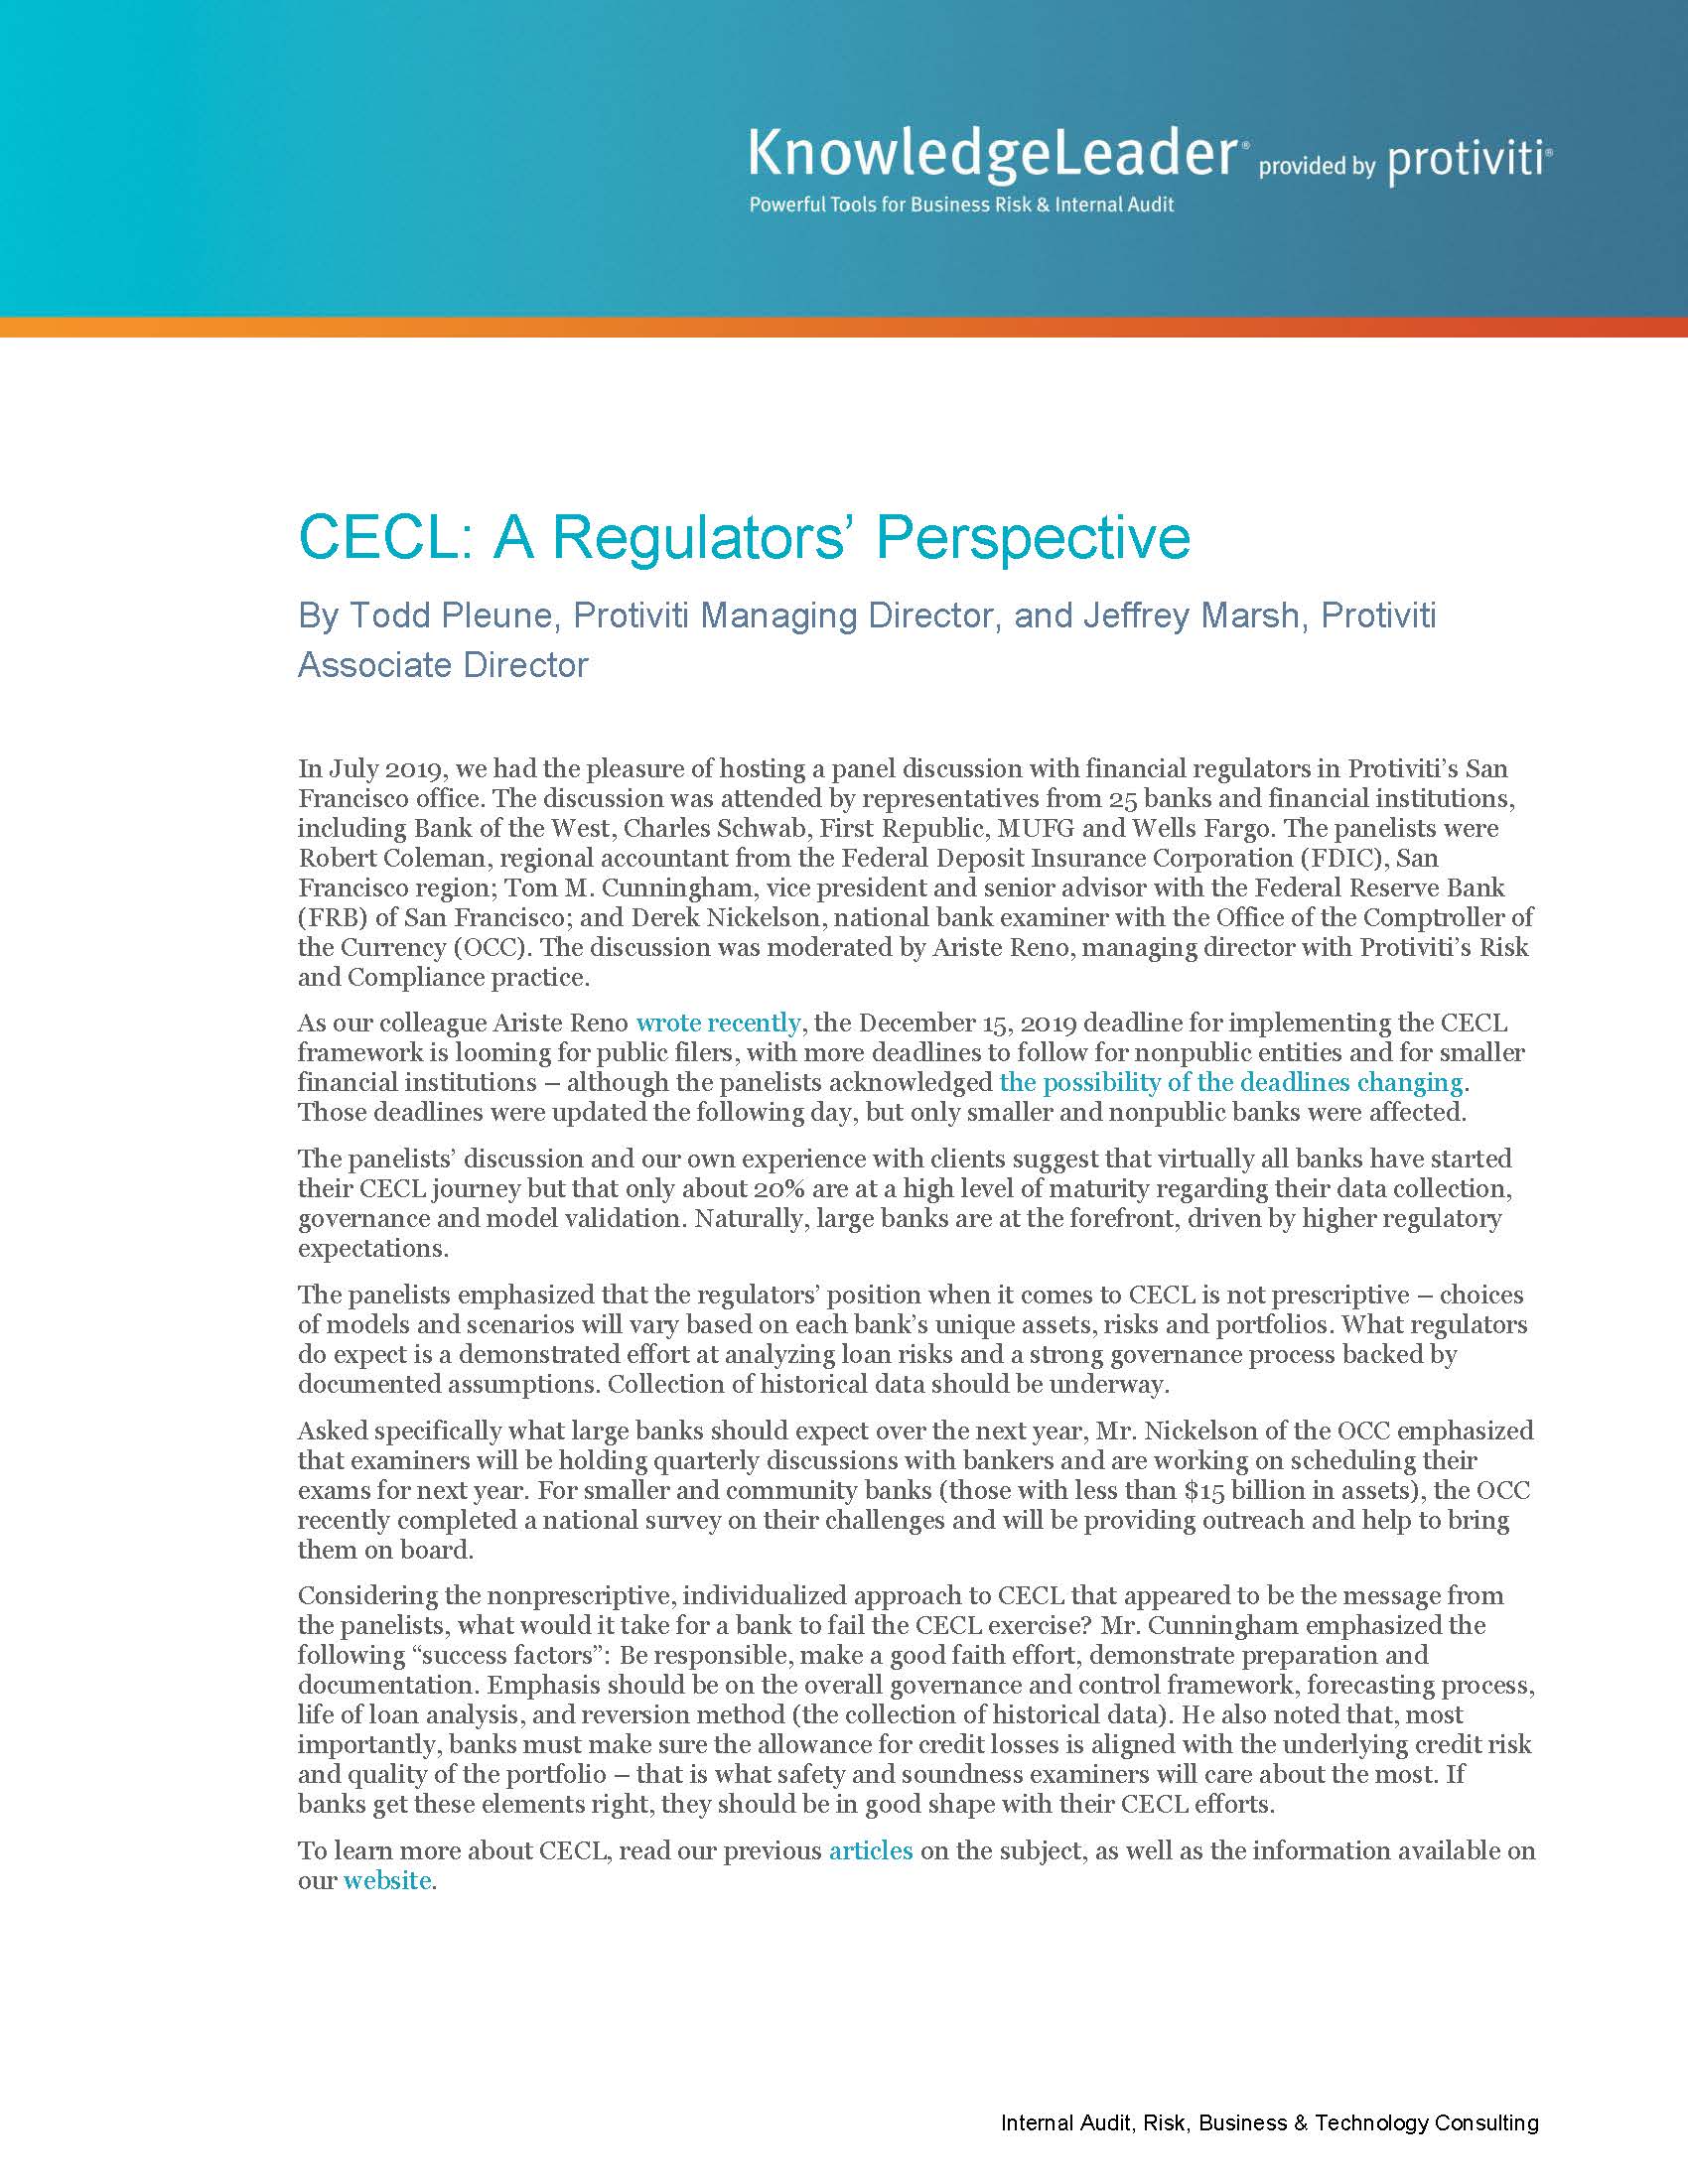 Screenshot of the first page of CECL: A Regulators’ Perspective